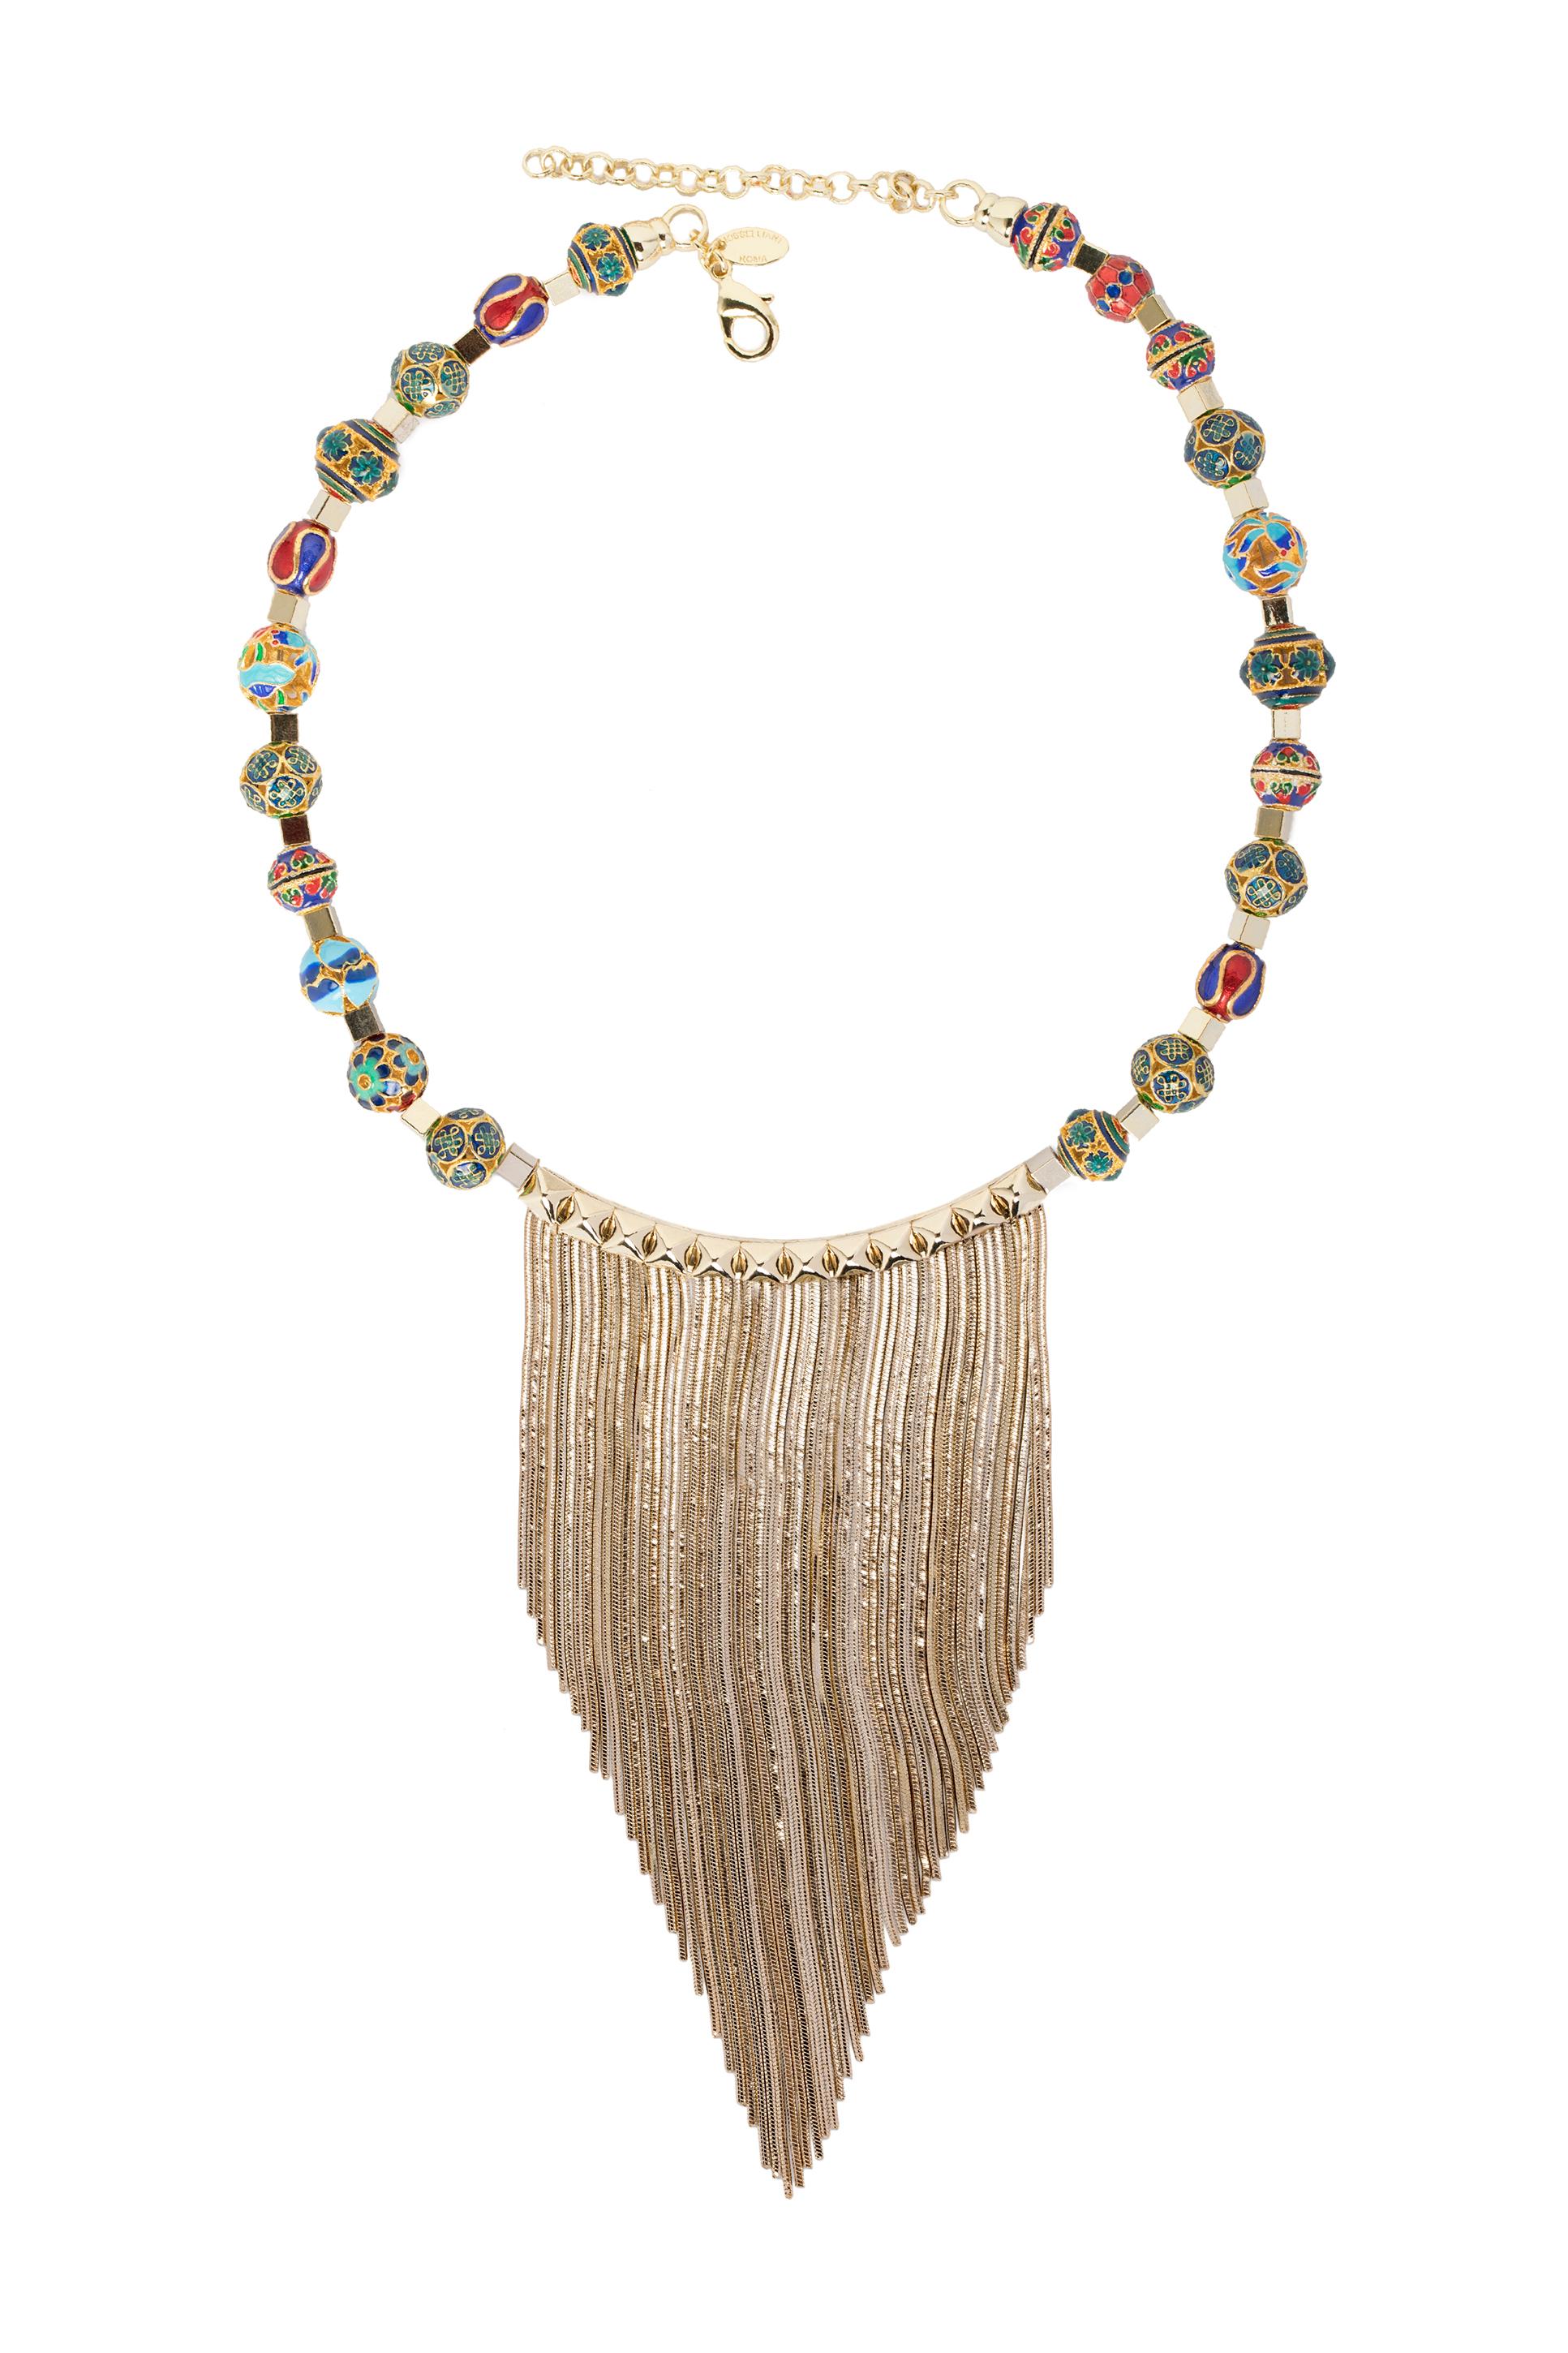 Refined and essential, the statement necklace from IOSSELLIANI is designed to blend some sense of tribal forms into a harmonious balance between elegance and extra impact. The custom made necklace is dotted with small enamel cloisonnèe beads